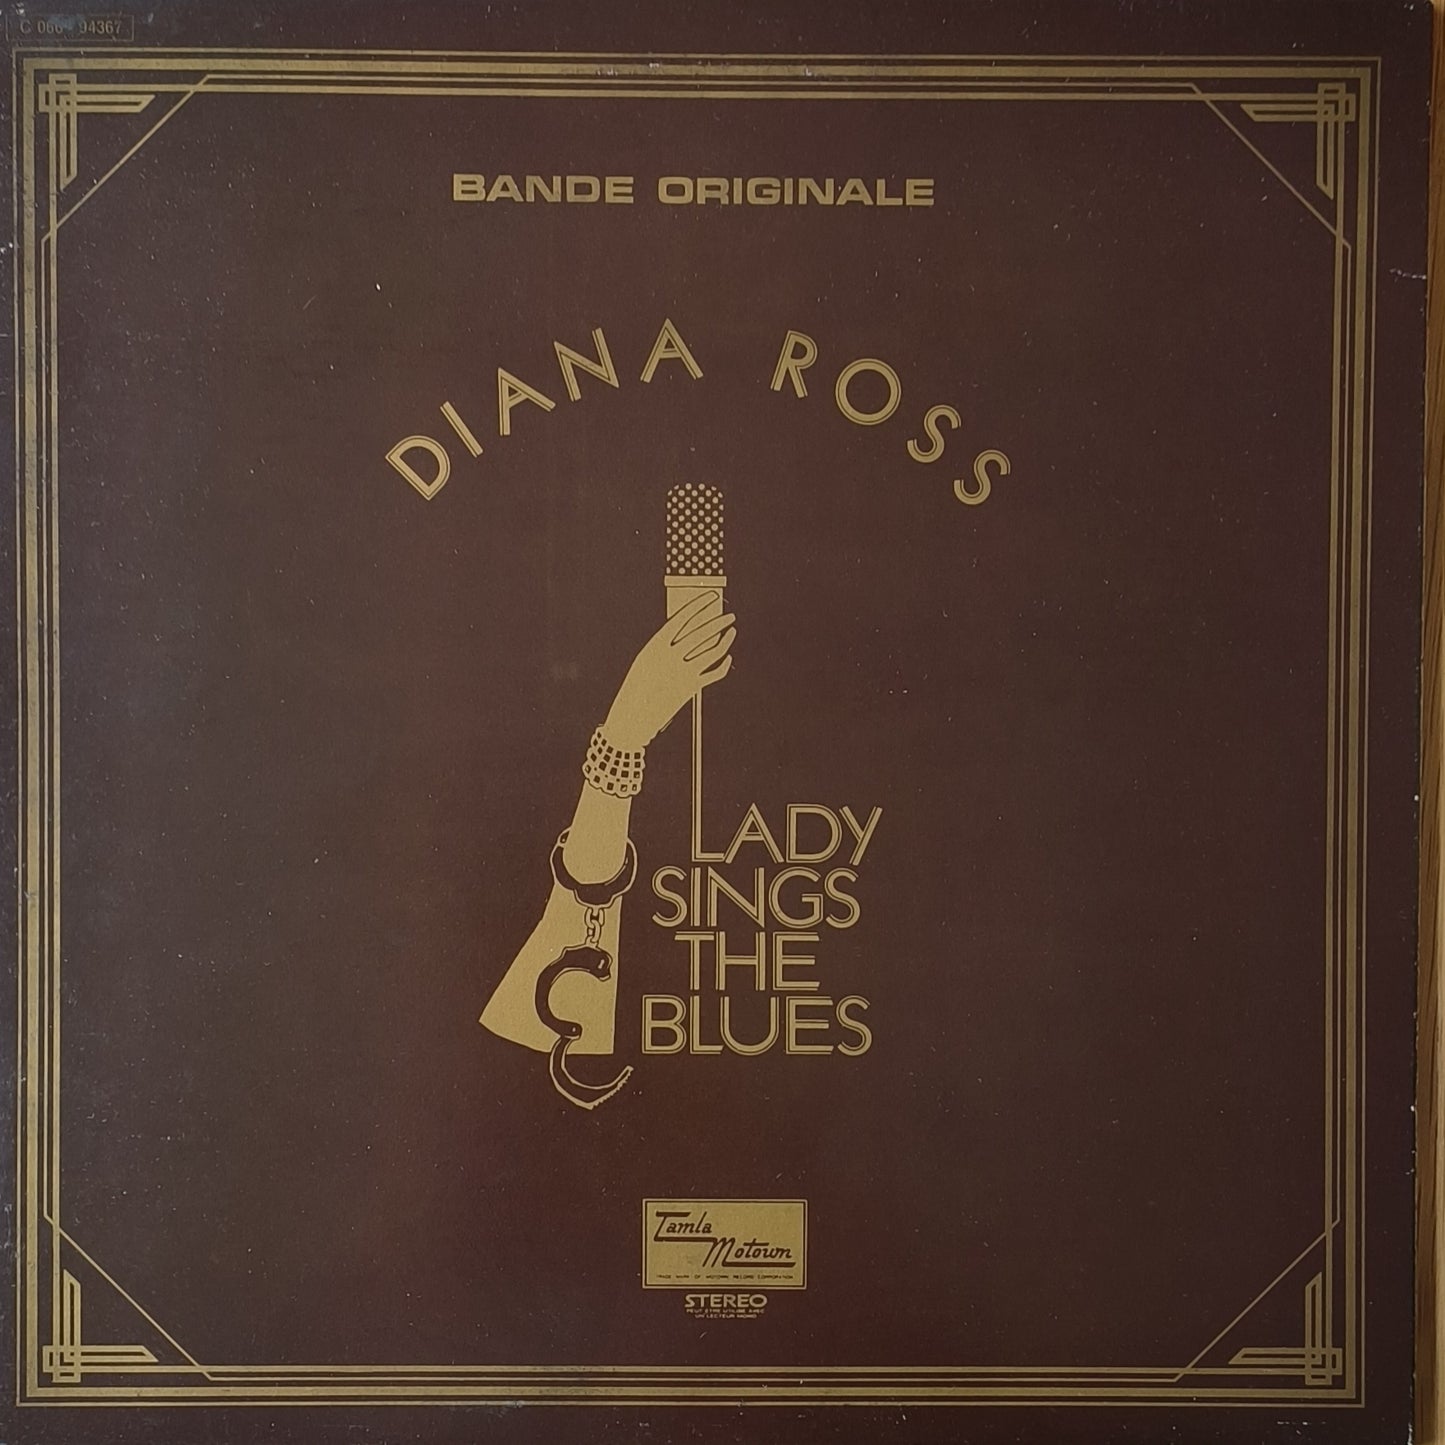 DIANA ROSS - Lady Sings The Blues (Bande Originale)